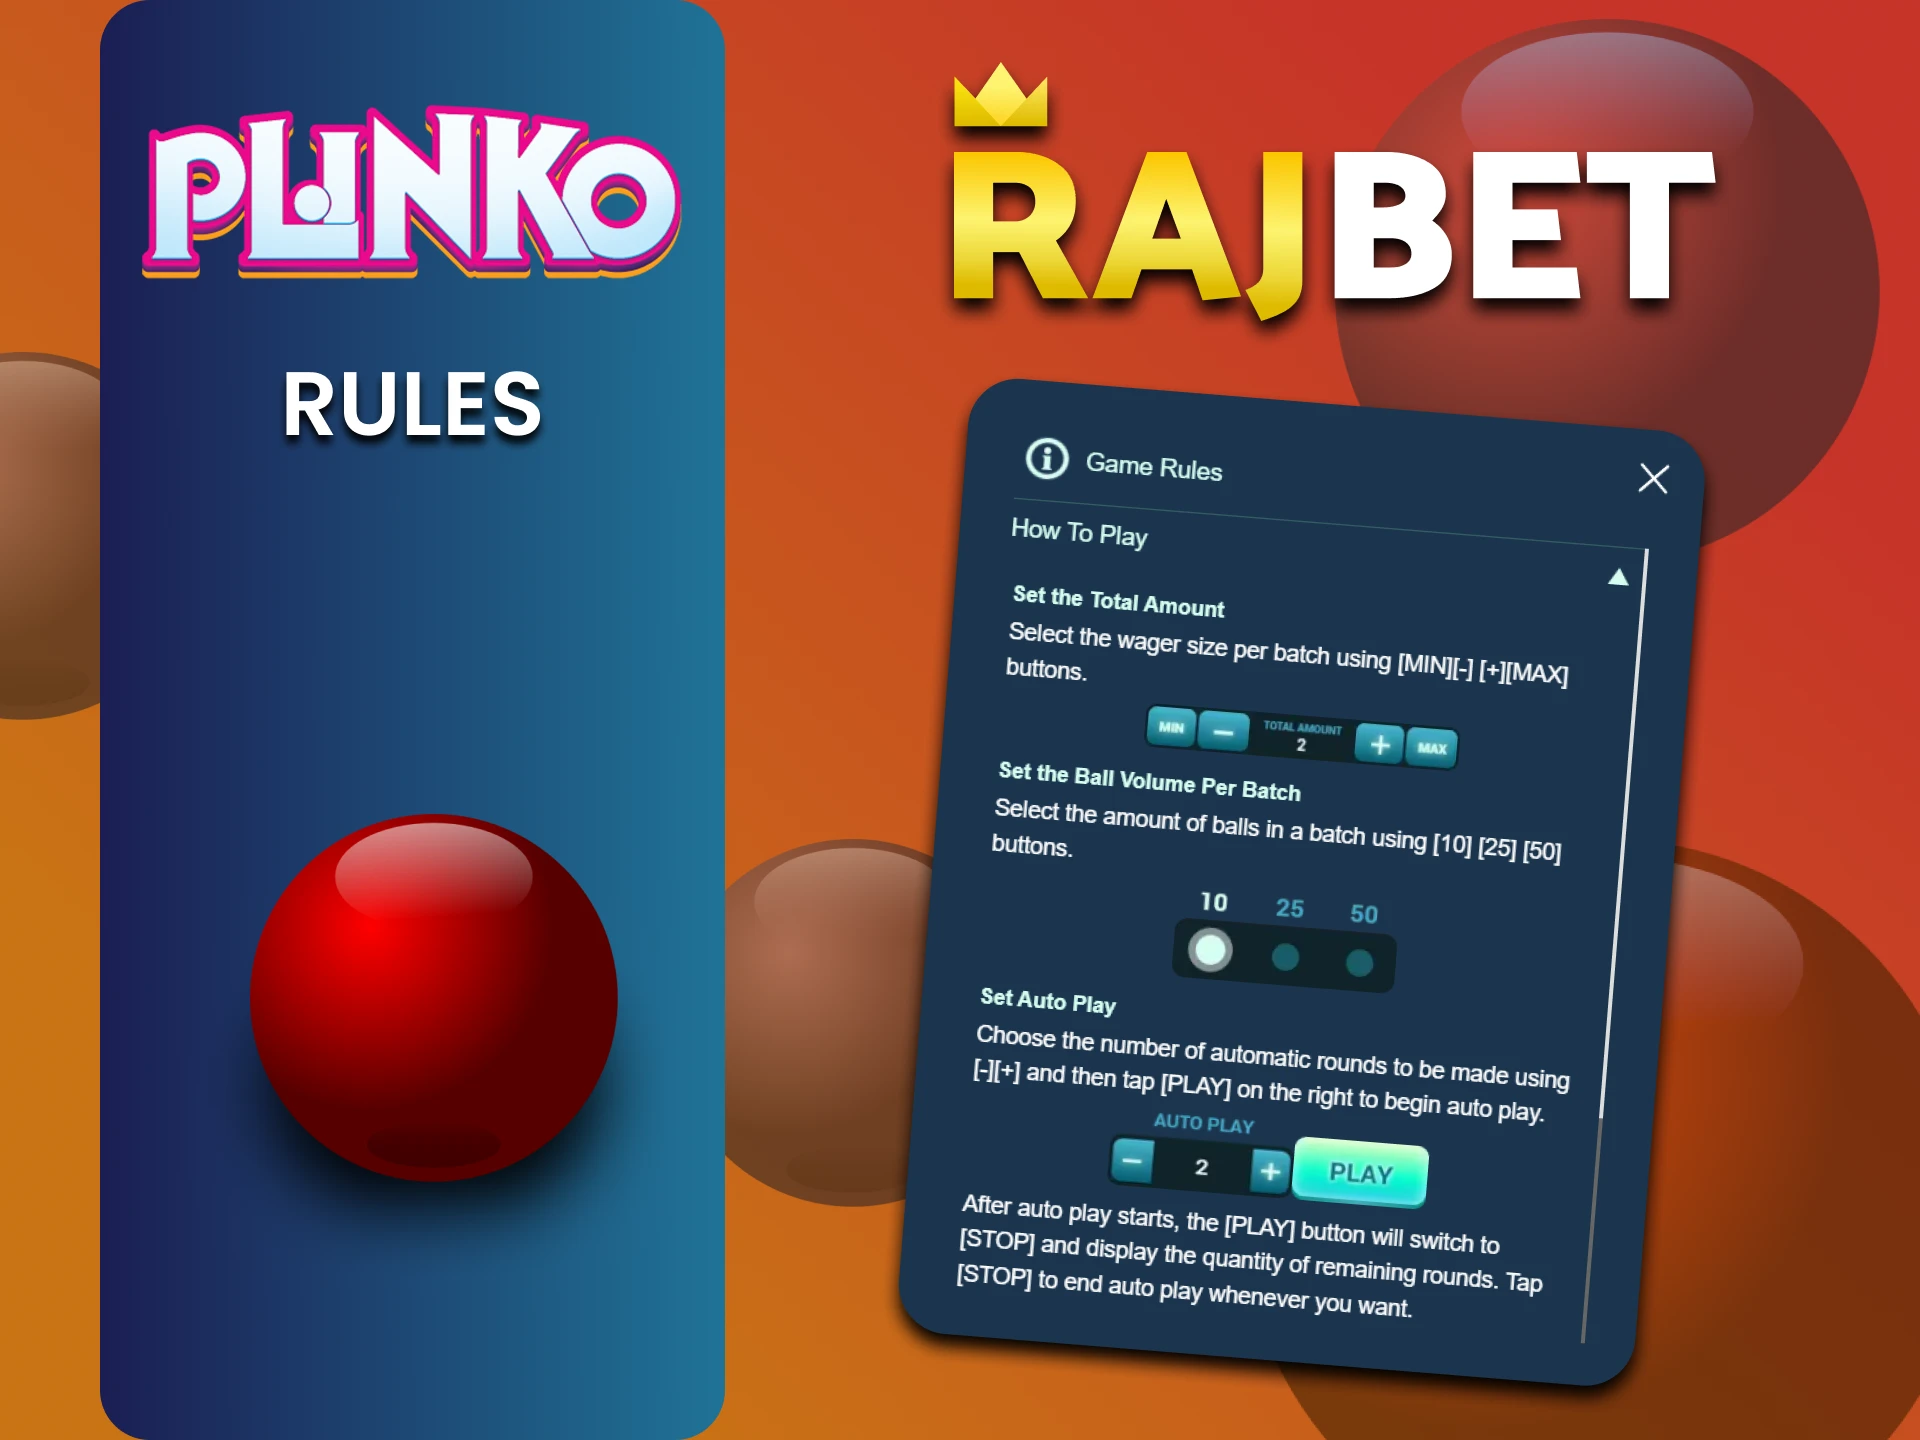 Learn the rules of playing Plinko on Rajbet.